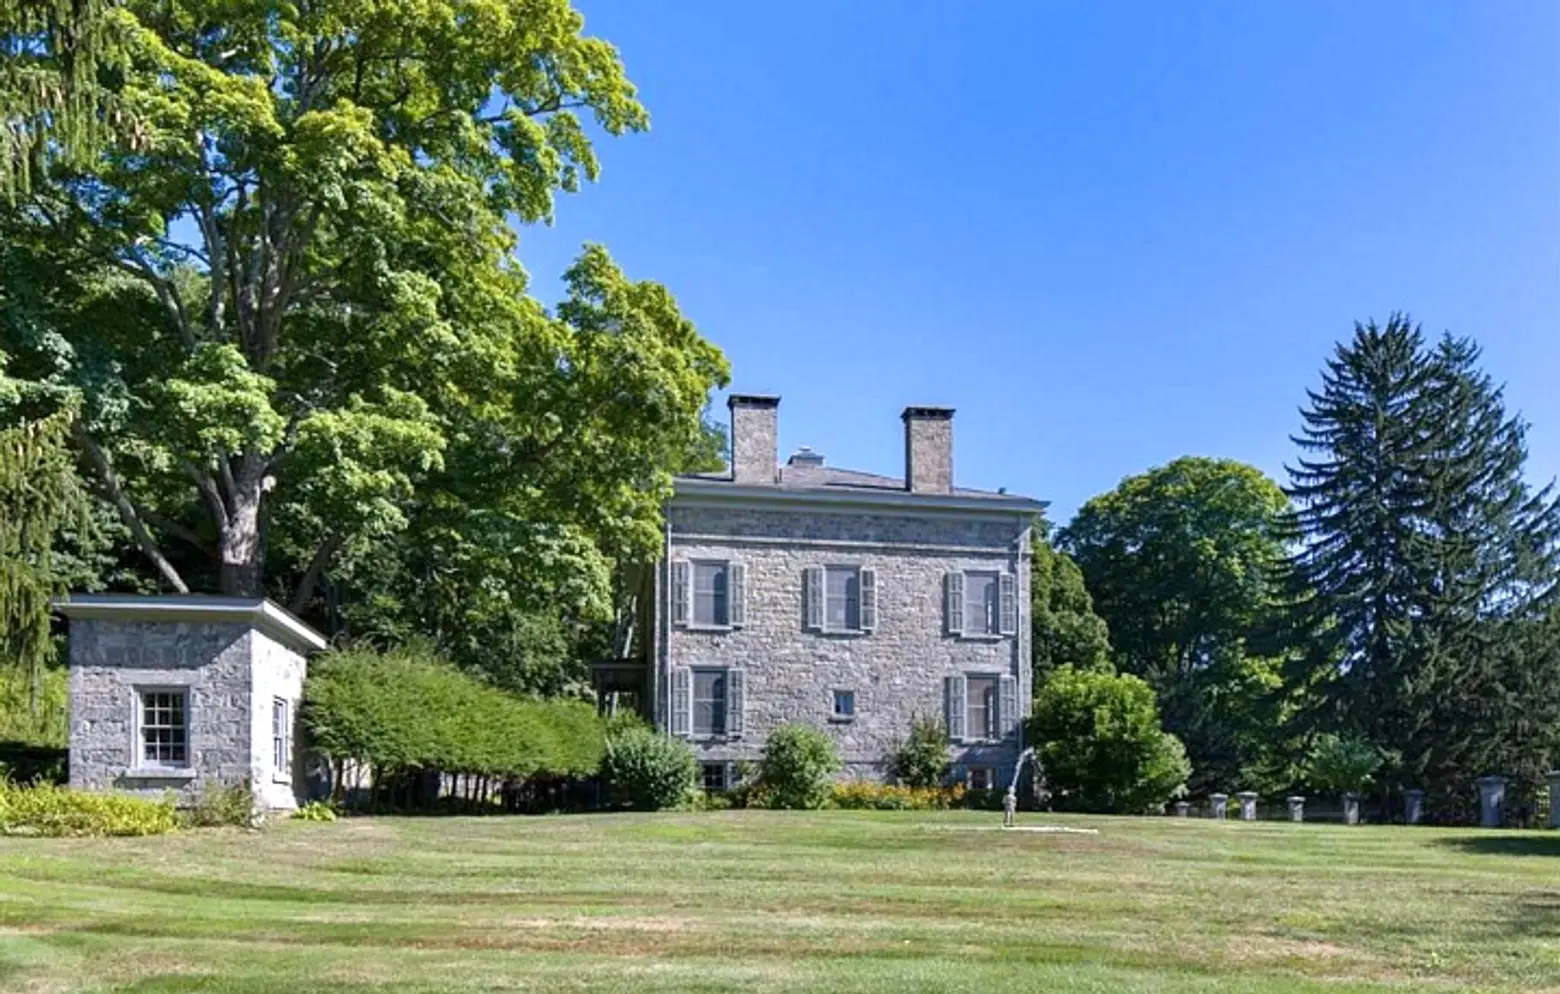 Gerard Crane House, 413 Route 202, Somers NY, Greek Revival mansion,